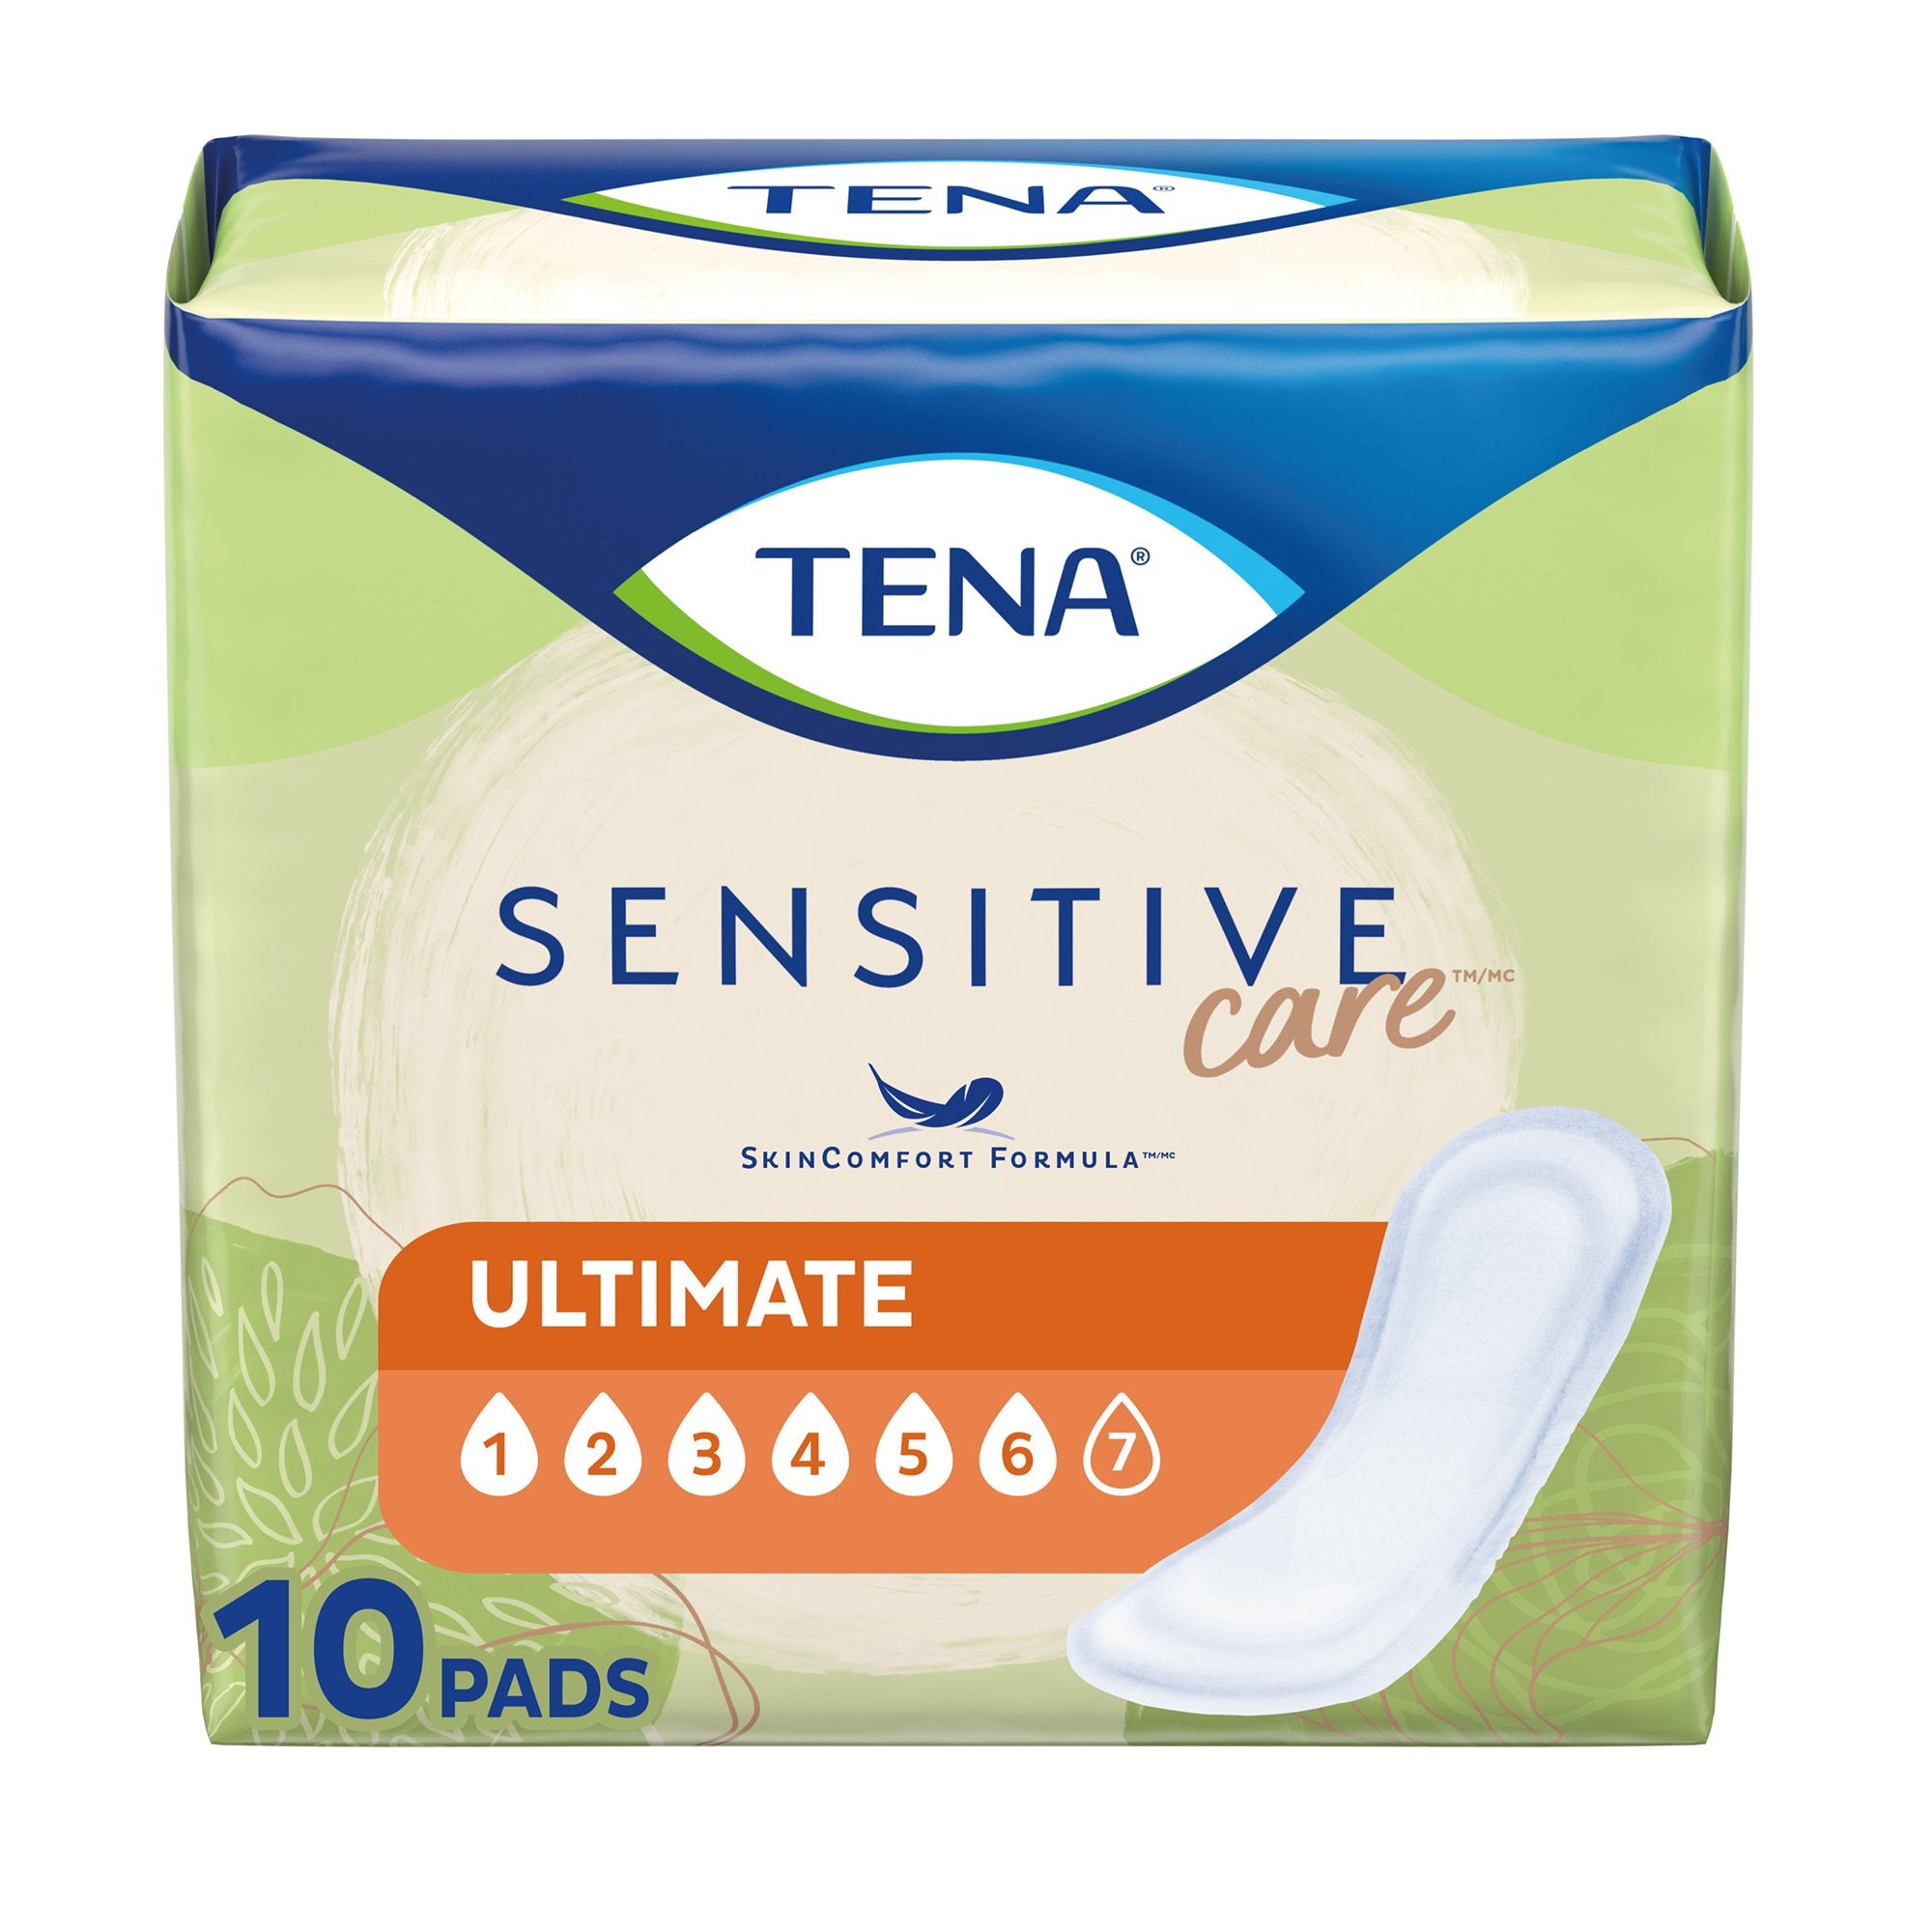 Bladder Control Pad TENA® Sensitive Care Ultimate 16 Inch Length Heavy Absorbency Dry-Fast Core™ One Size Fits Most